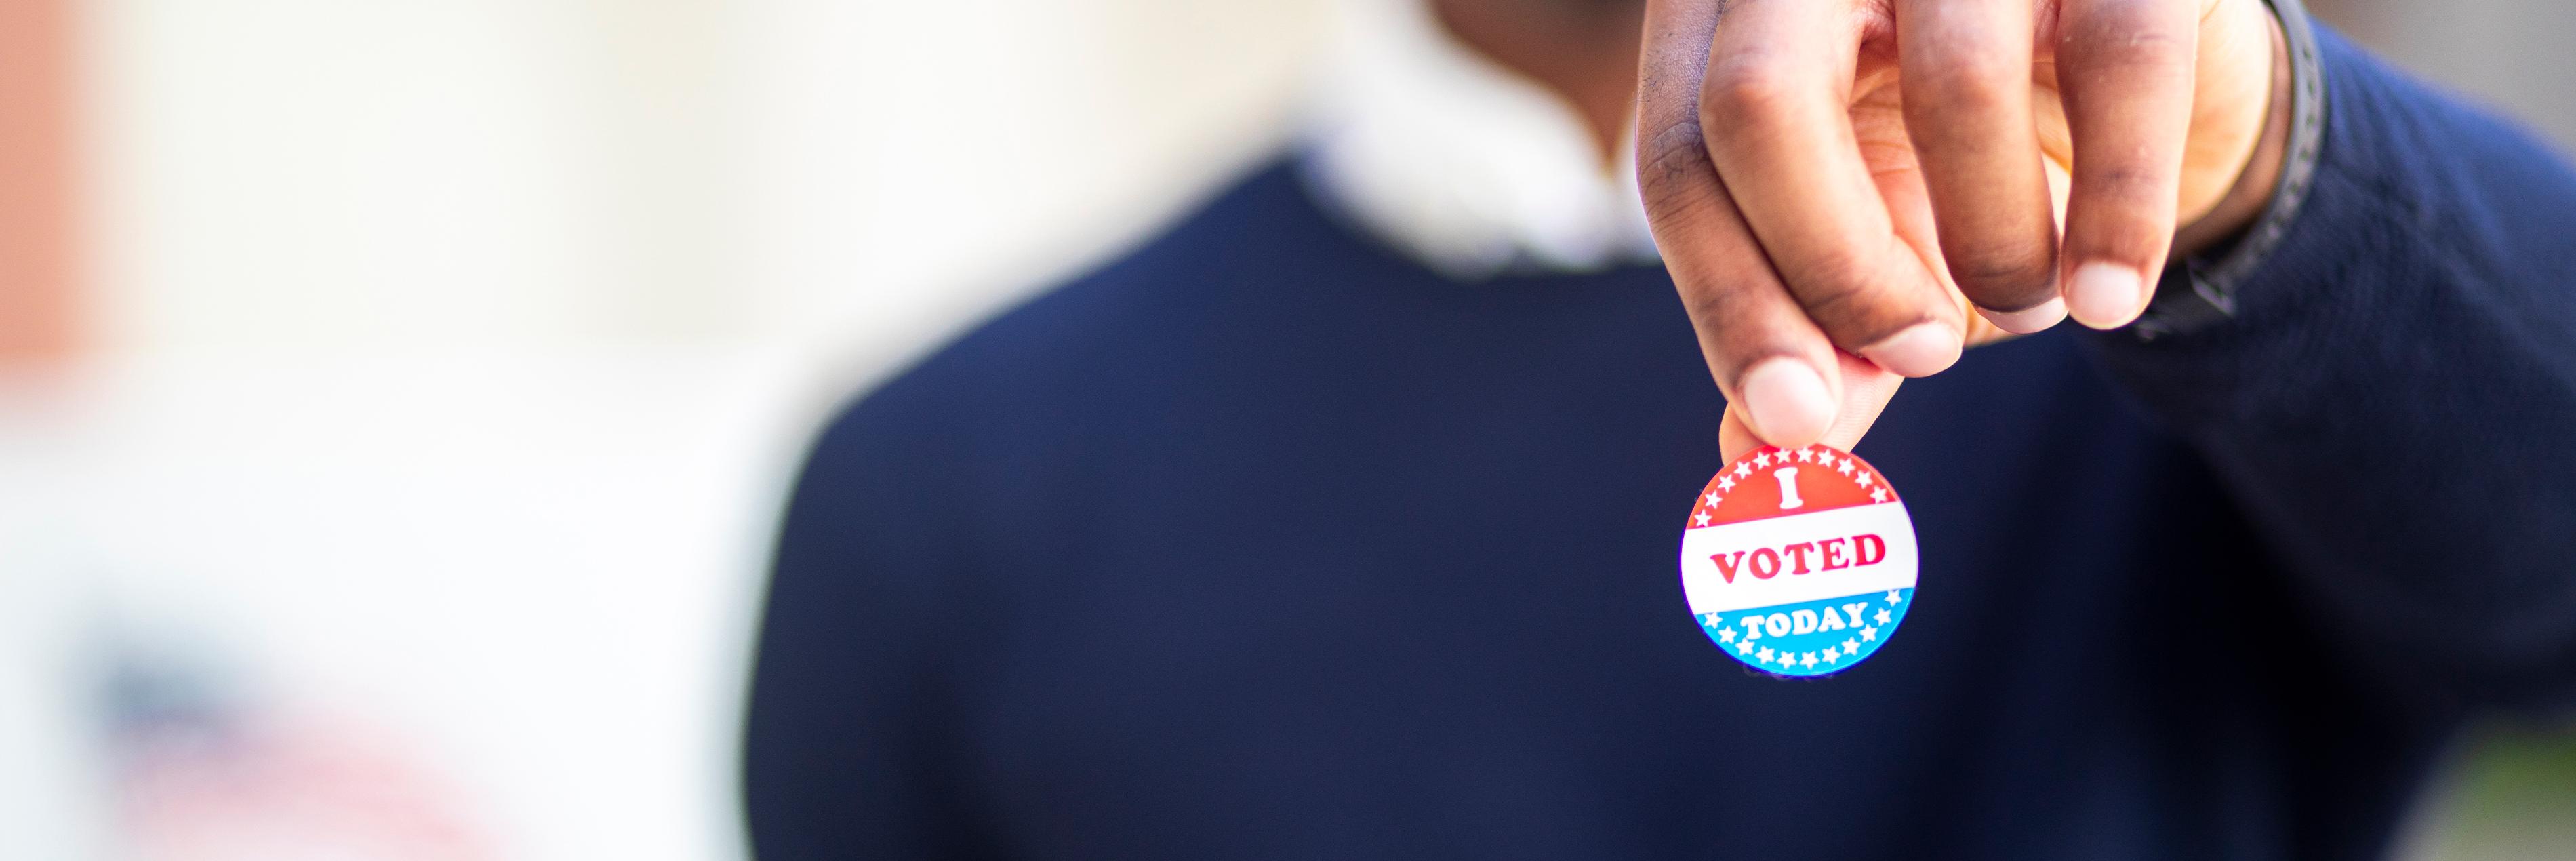 Man holding a I voted today pin